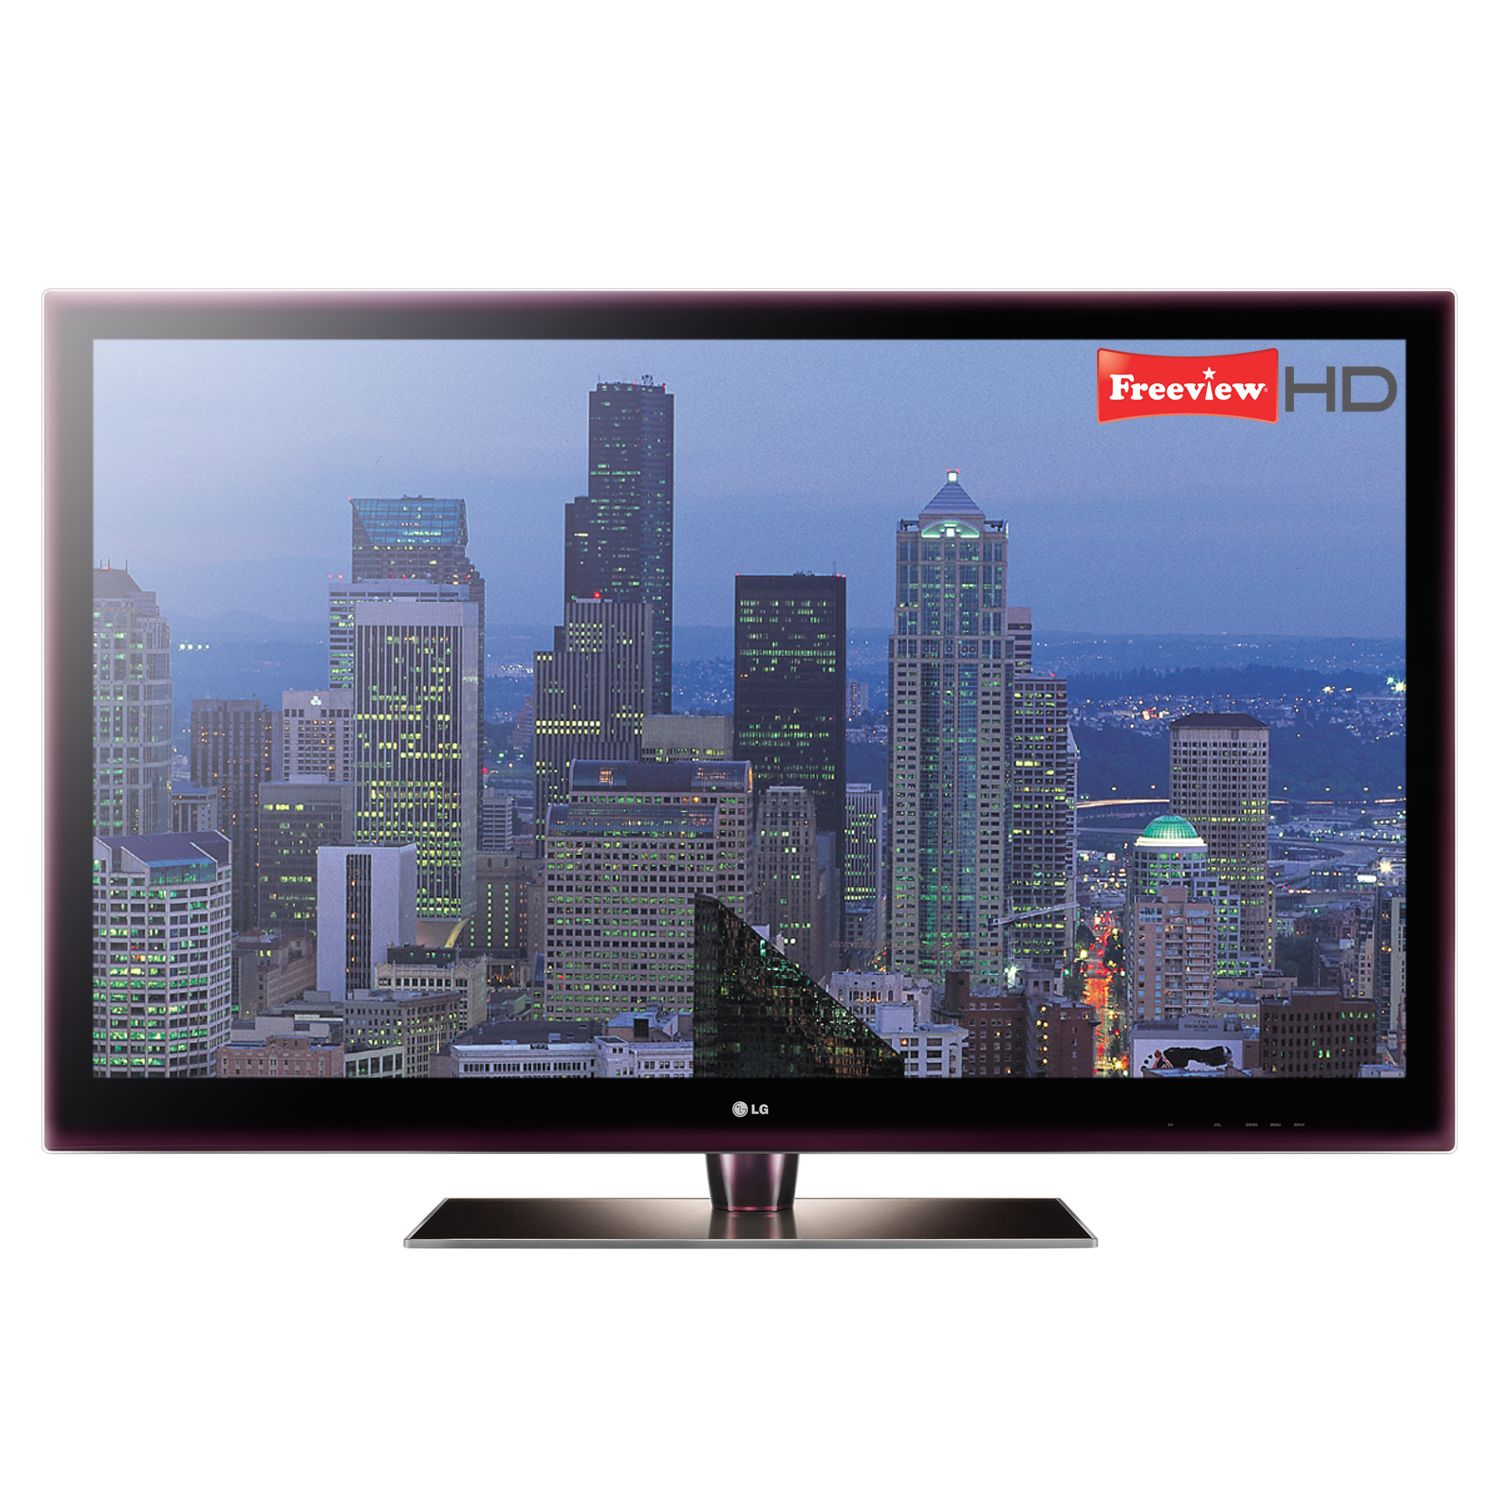 LG Infinia 47LE7900 LED HD 1080p Television, 47 Inch with Built-in Freeview HD at JohnLewis